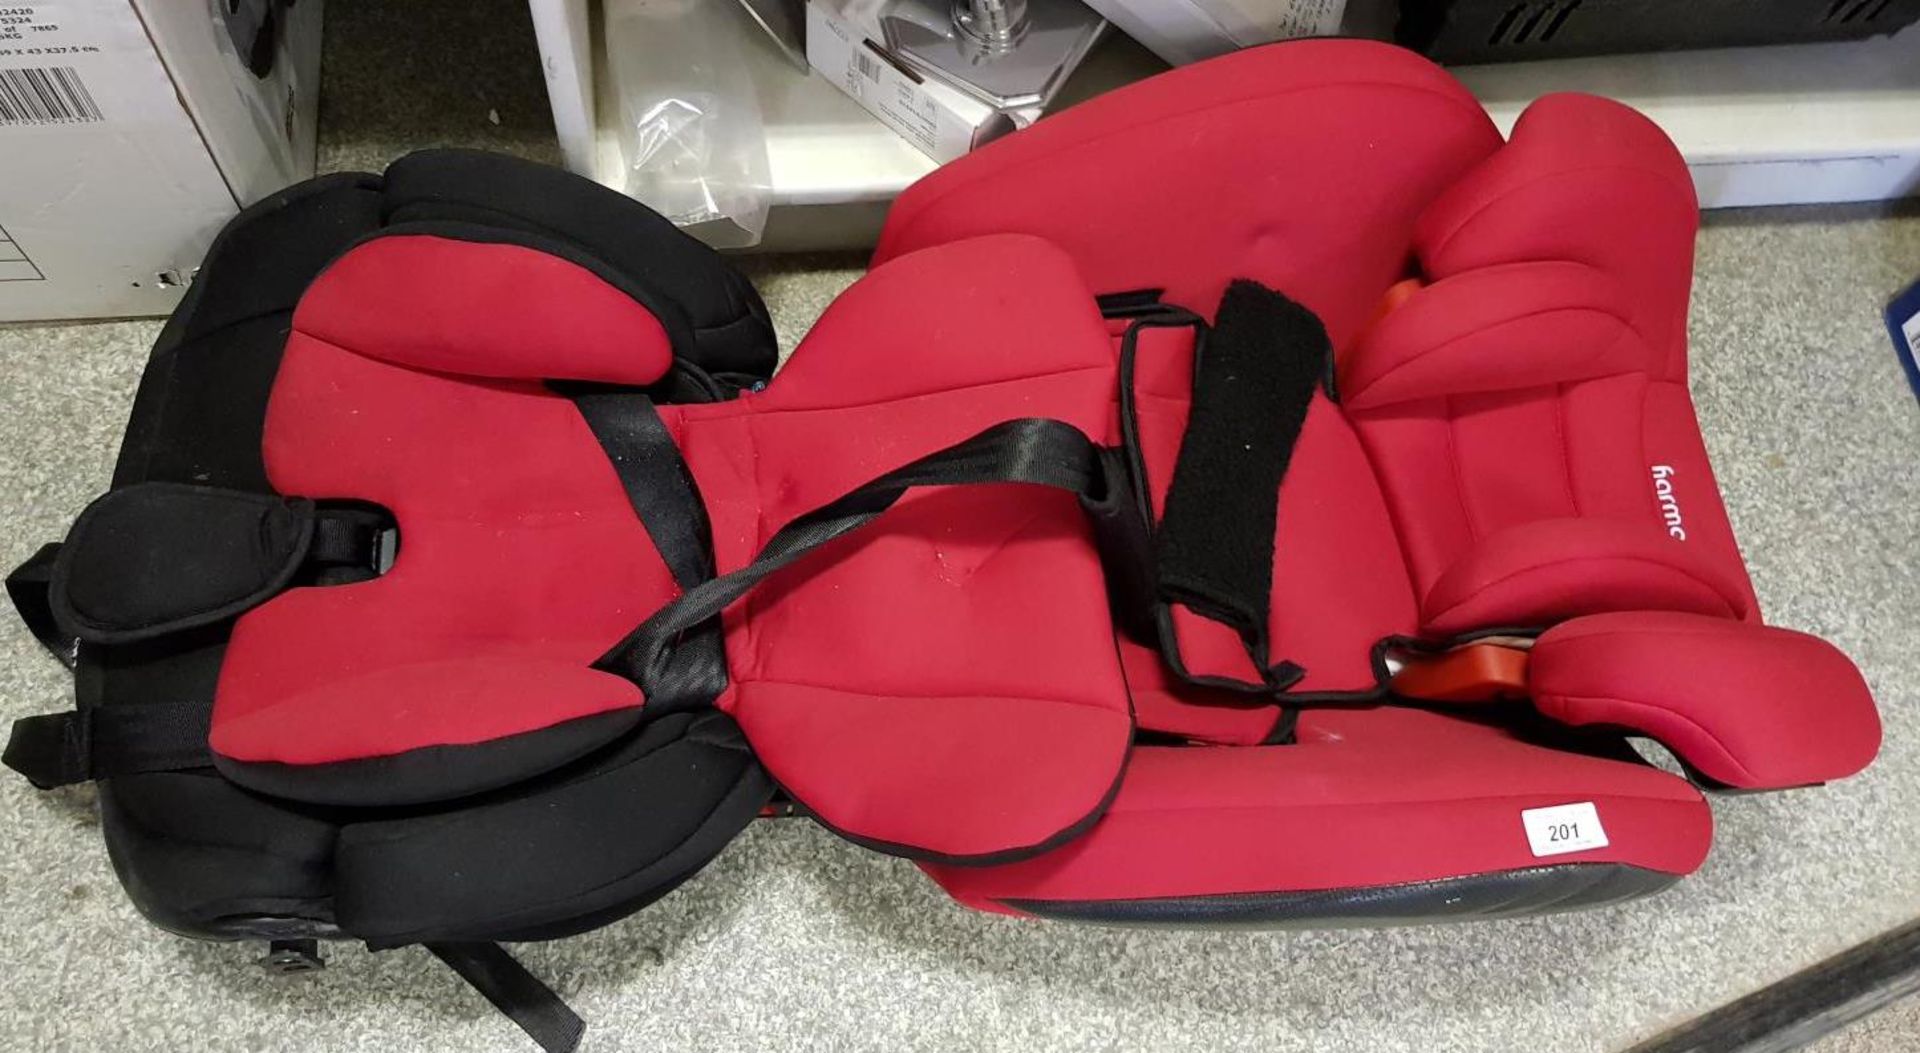 Harmony Car Seat – red (as seen)